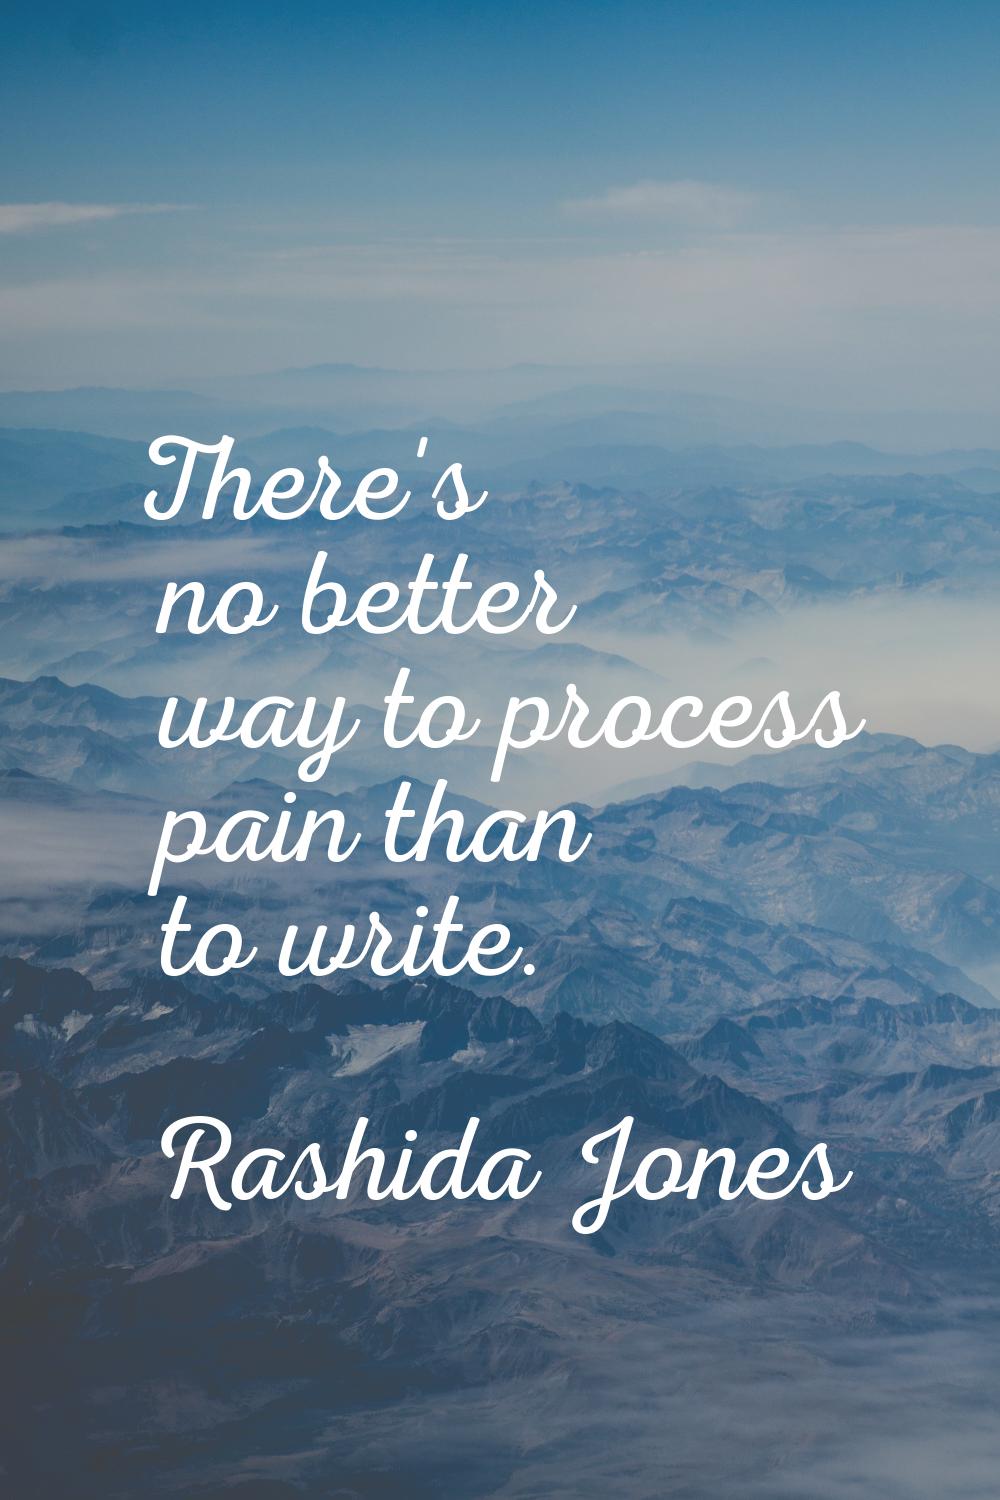 There's no better way to process pain than to write.